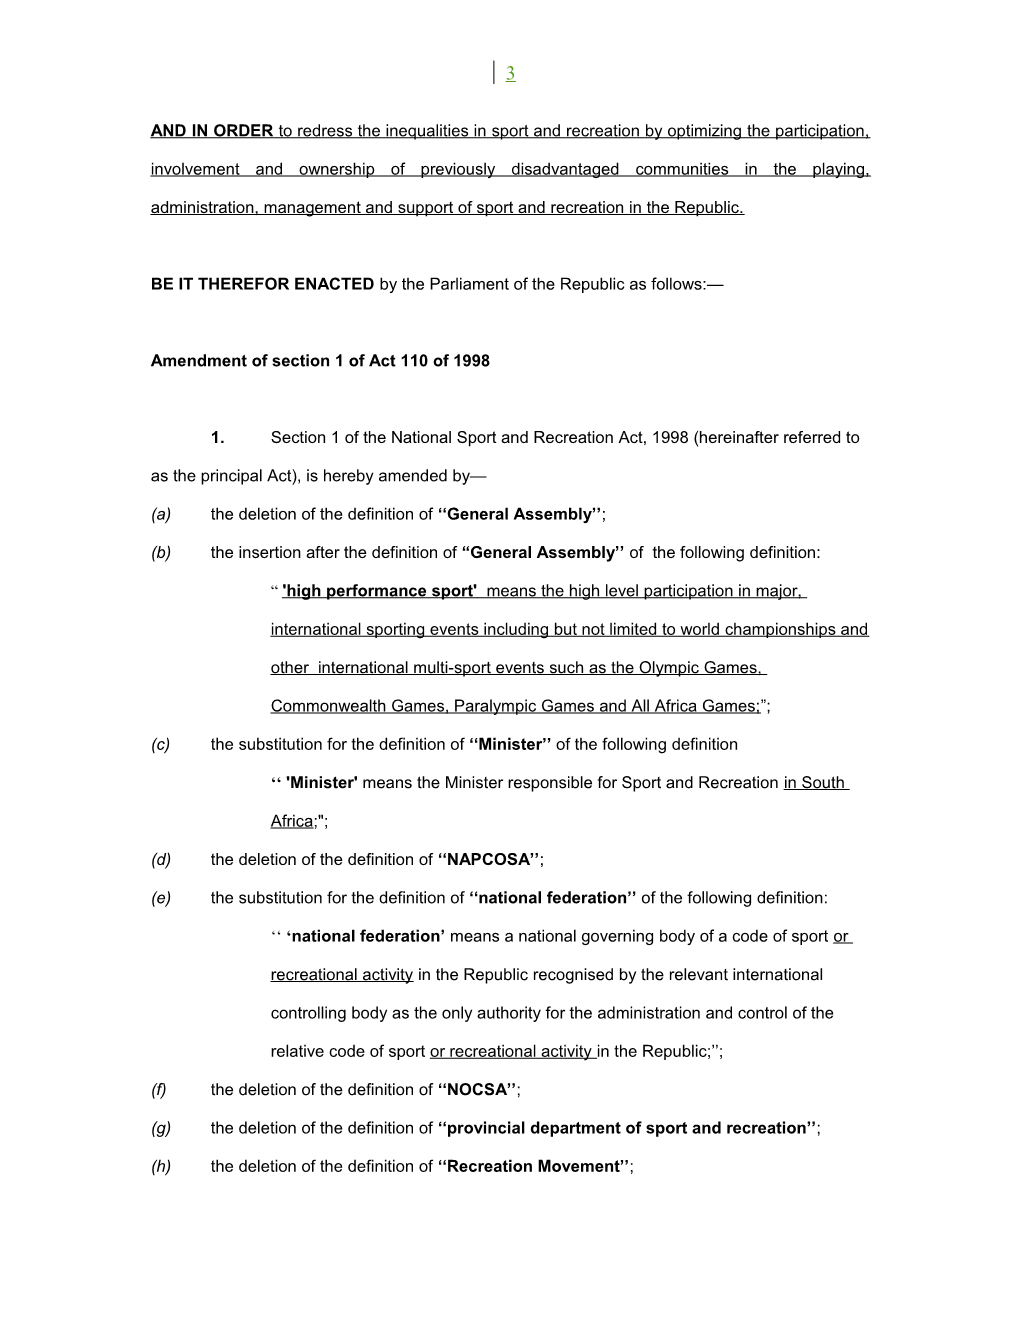 Proposed Amendments to the National Sports and Recreation Amendment Bill